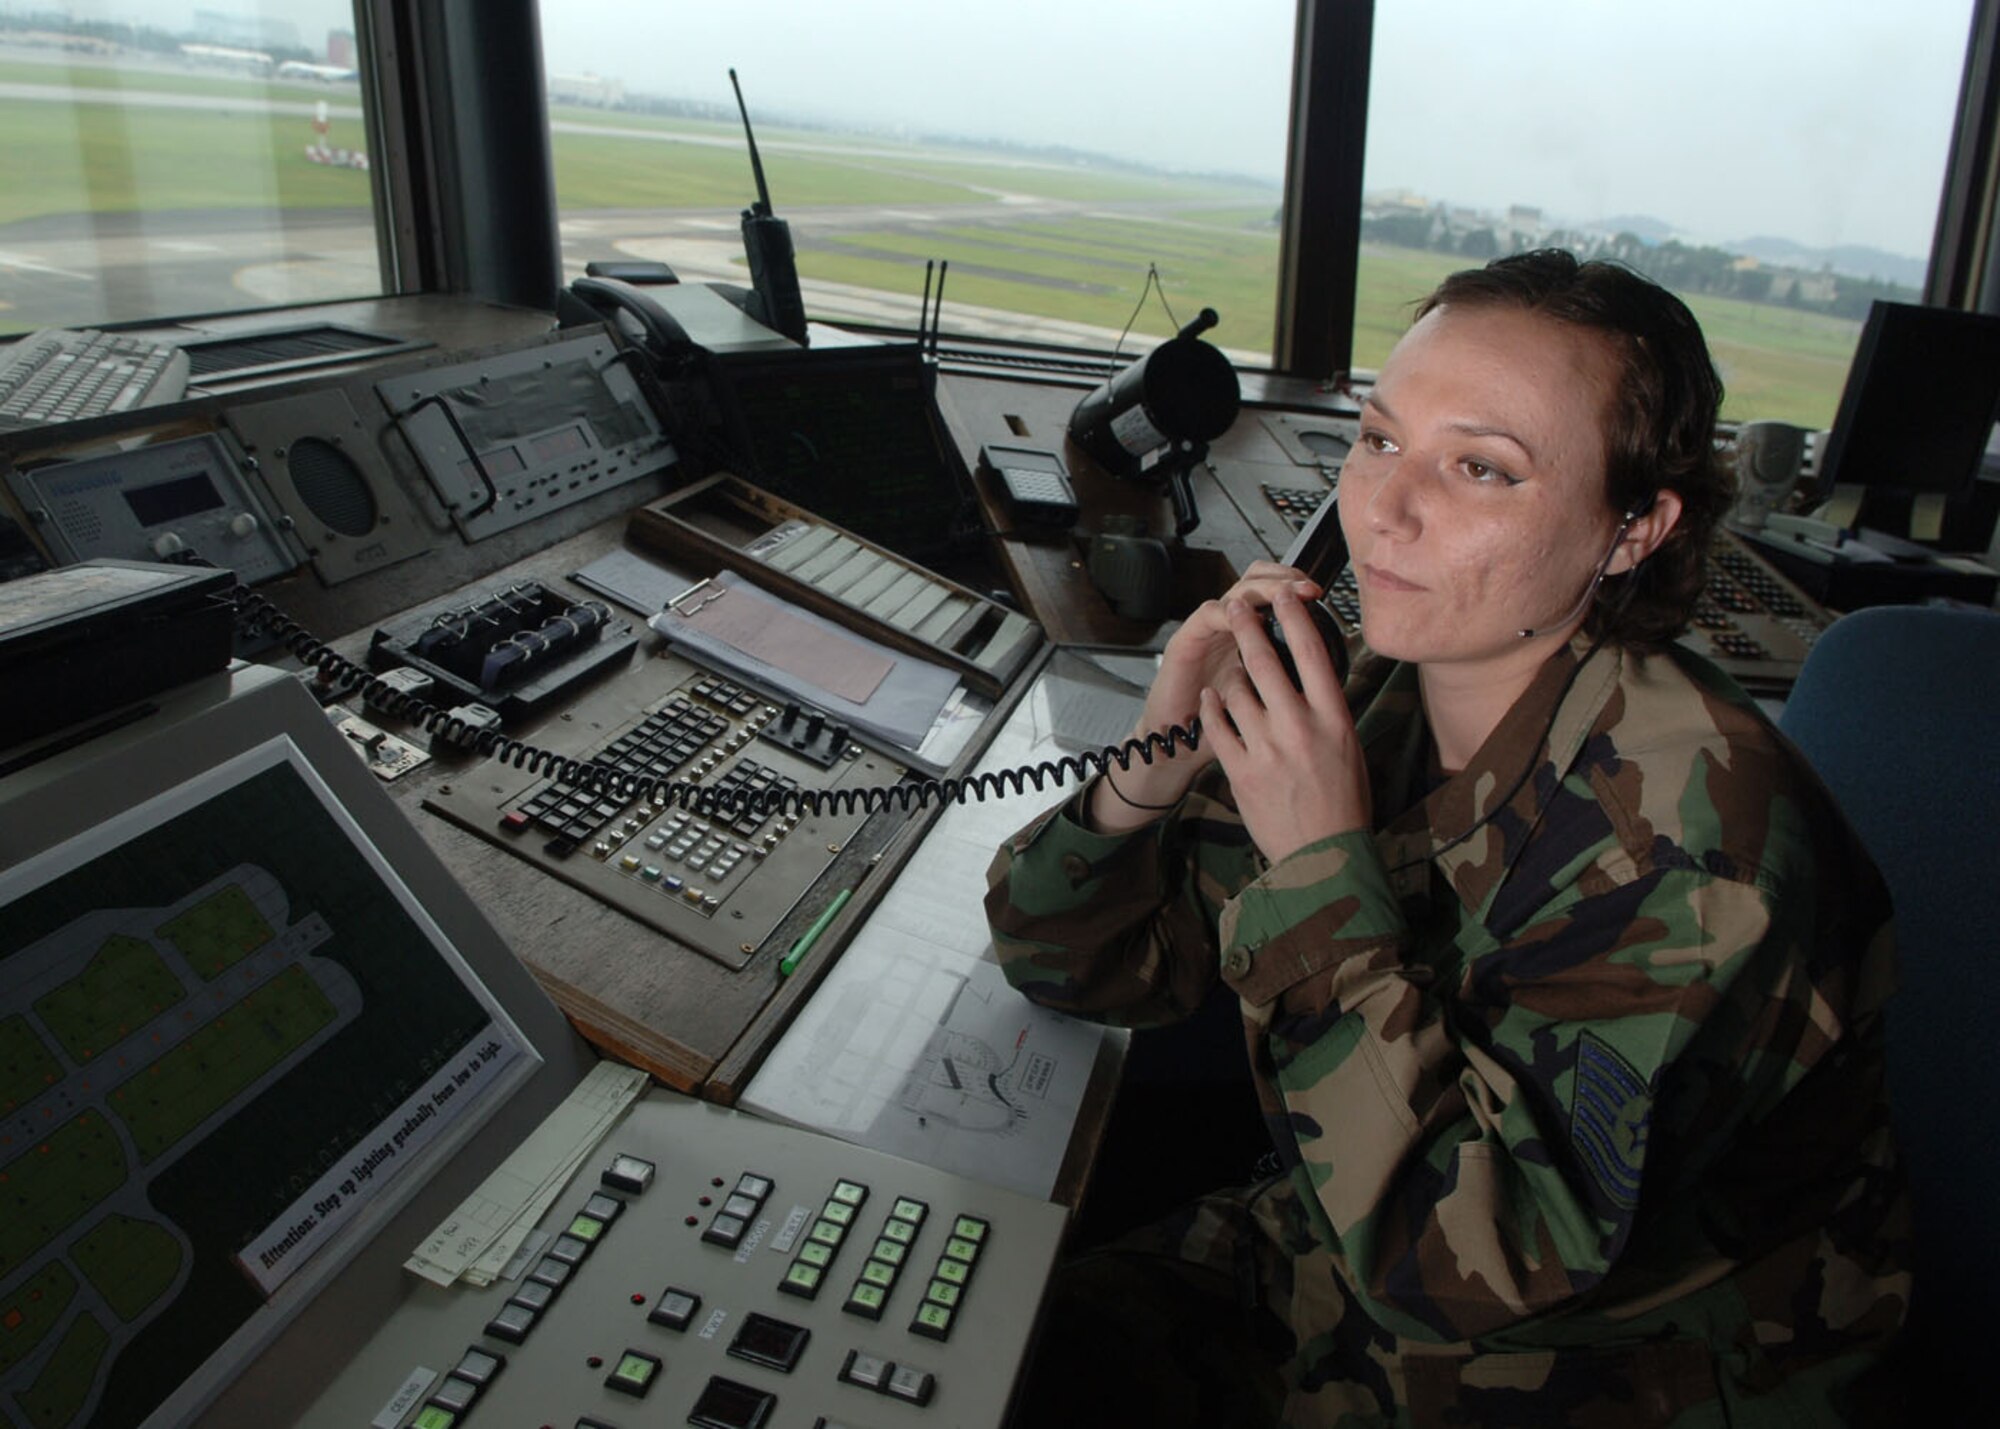 Tech. Sgt. Judy Plummer, 374 Operational Support Squadron, listens to a recording of the ATIS for completeness and accuracy.  The ATIS is a recorded message for the pilots including weather and airport information.  (U.S. Air Force photo by Senior Airman Veronica Pierce)